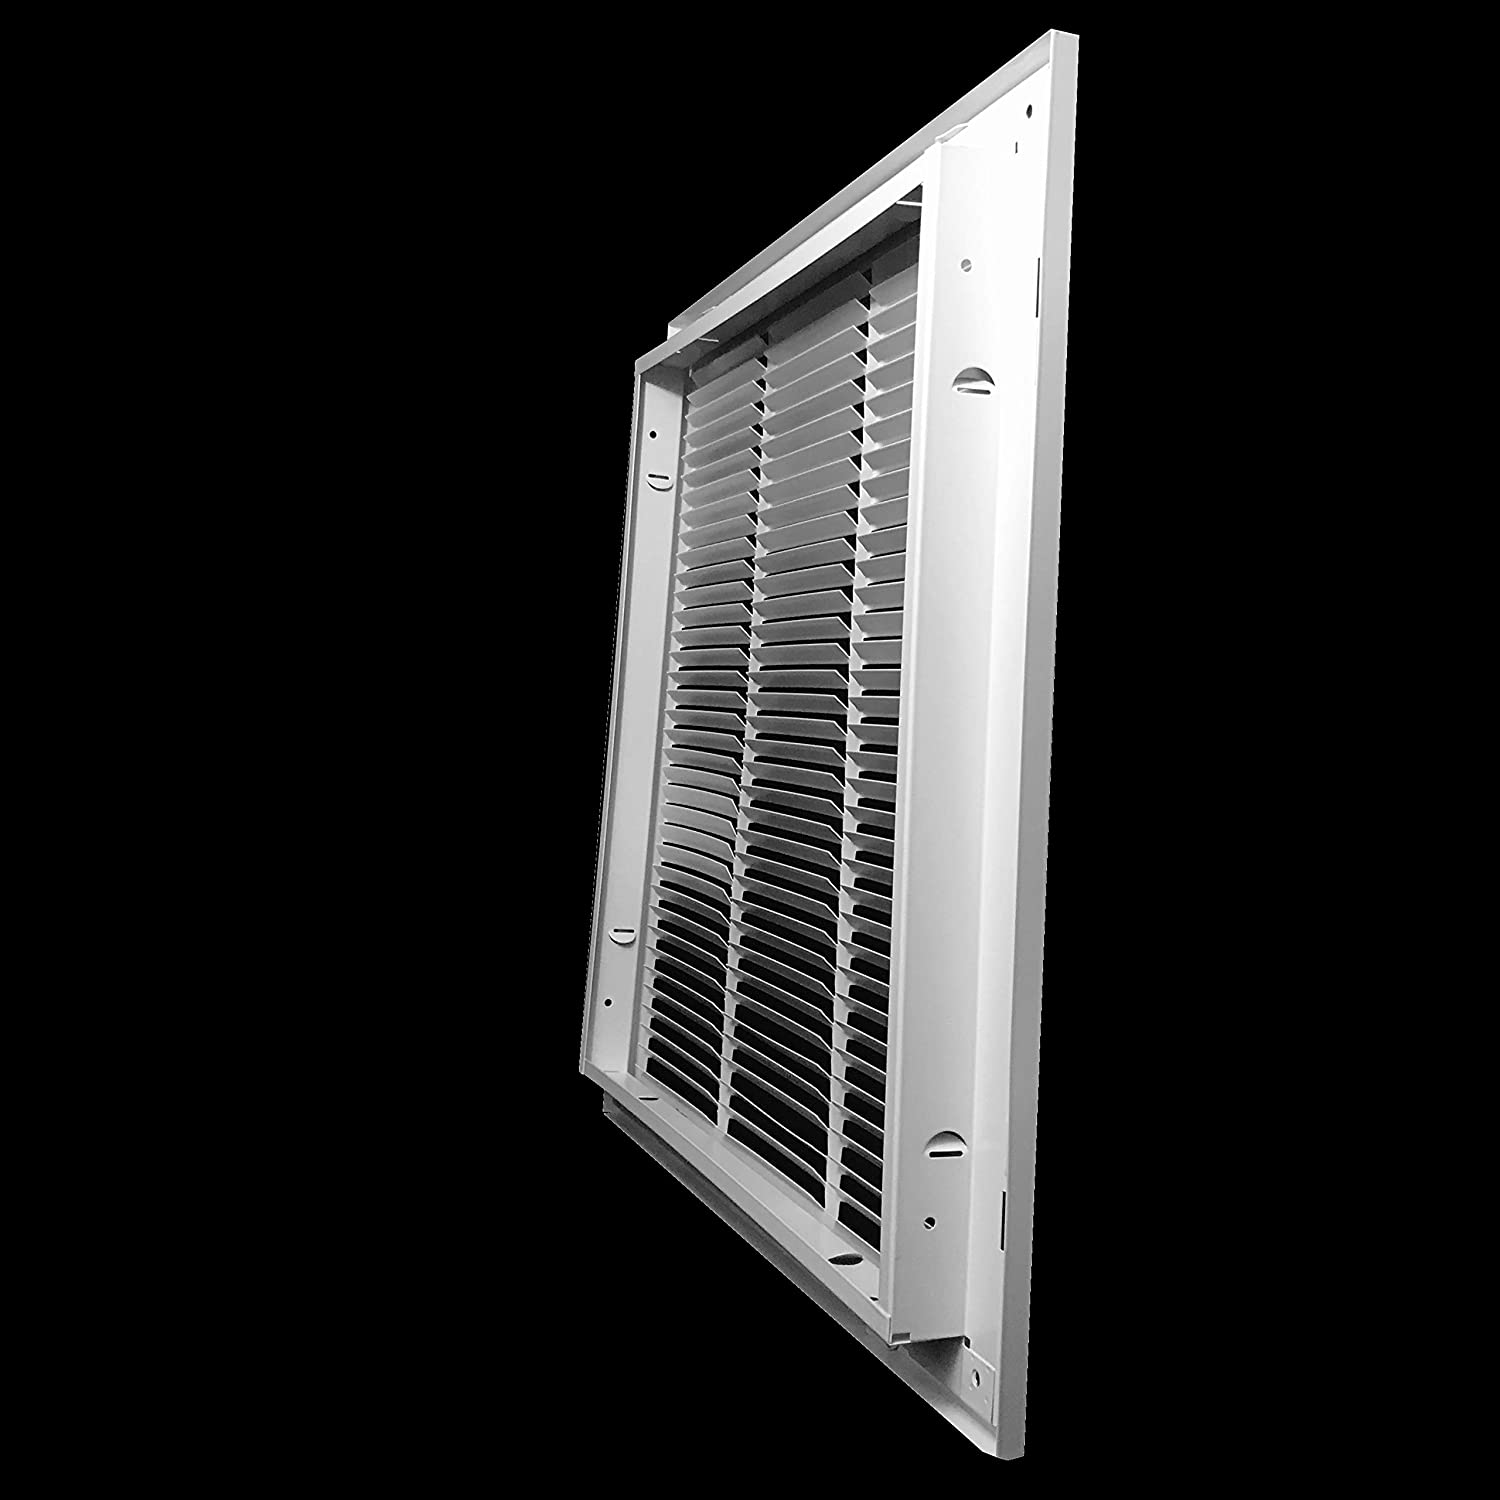 14" X 30" Duct Opening | Steel Return Air Filter Grille for Sidewall and Ceiling